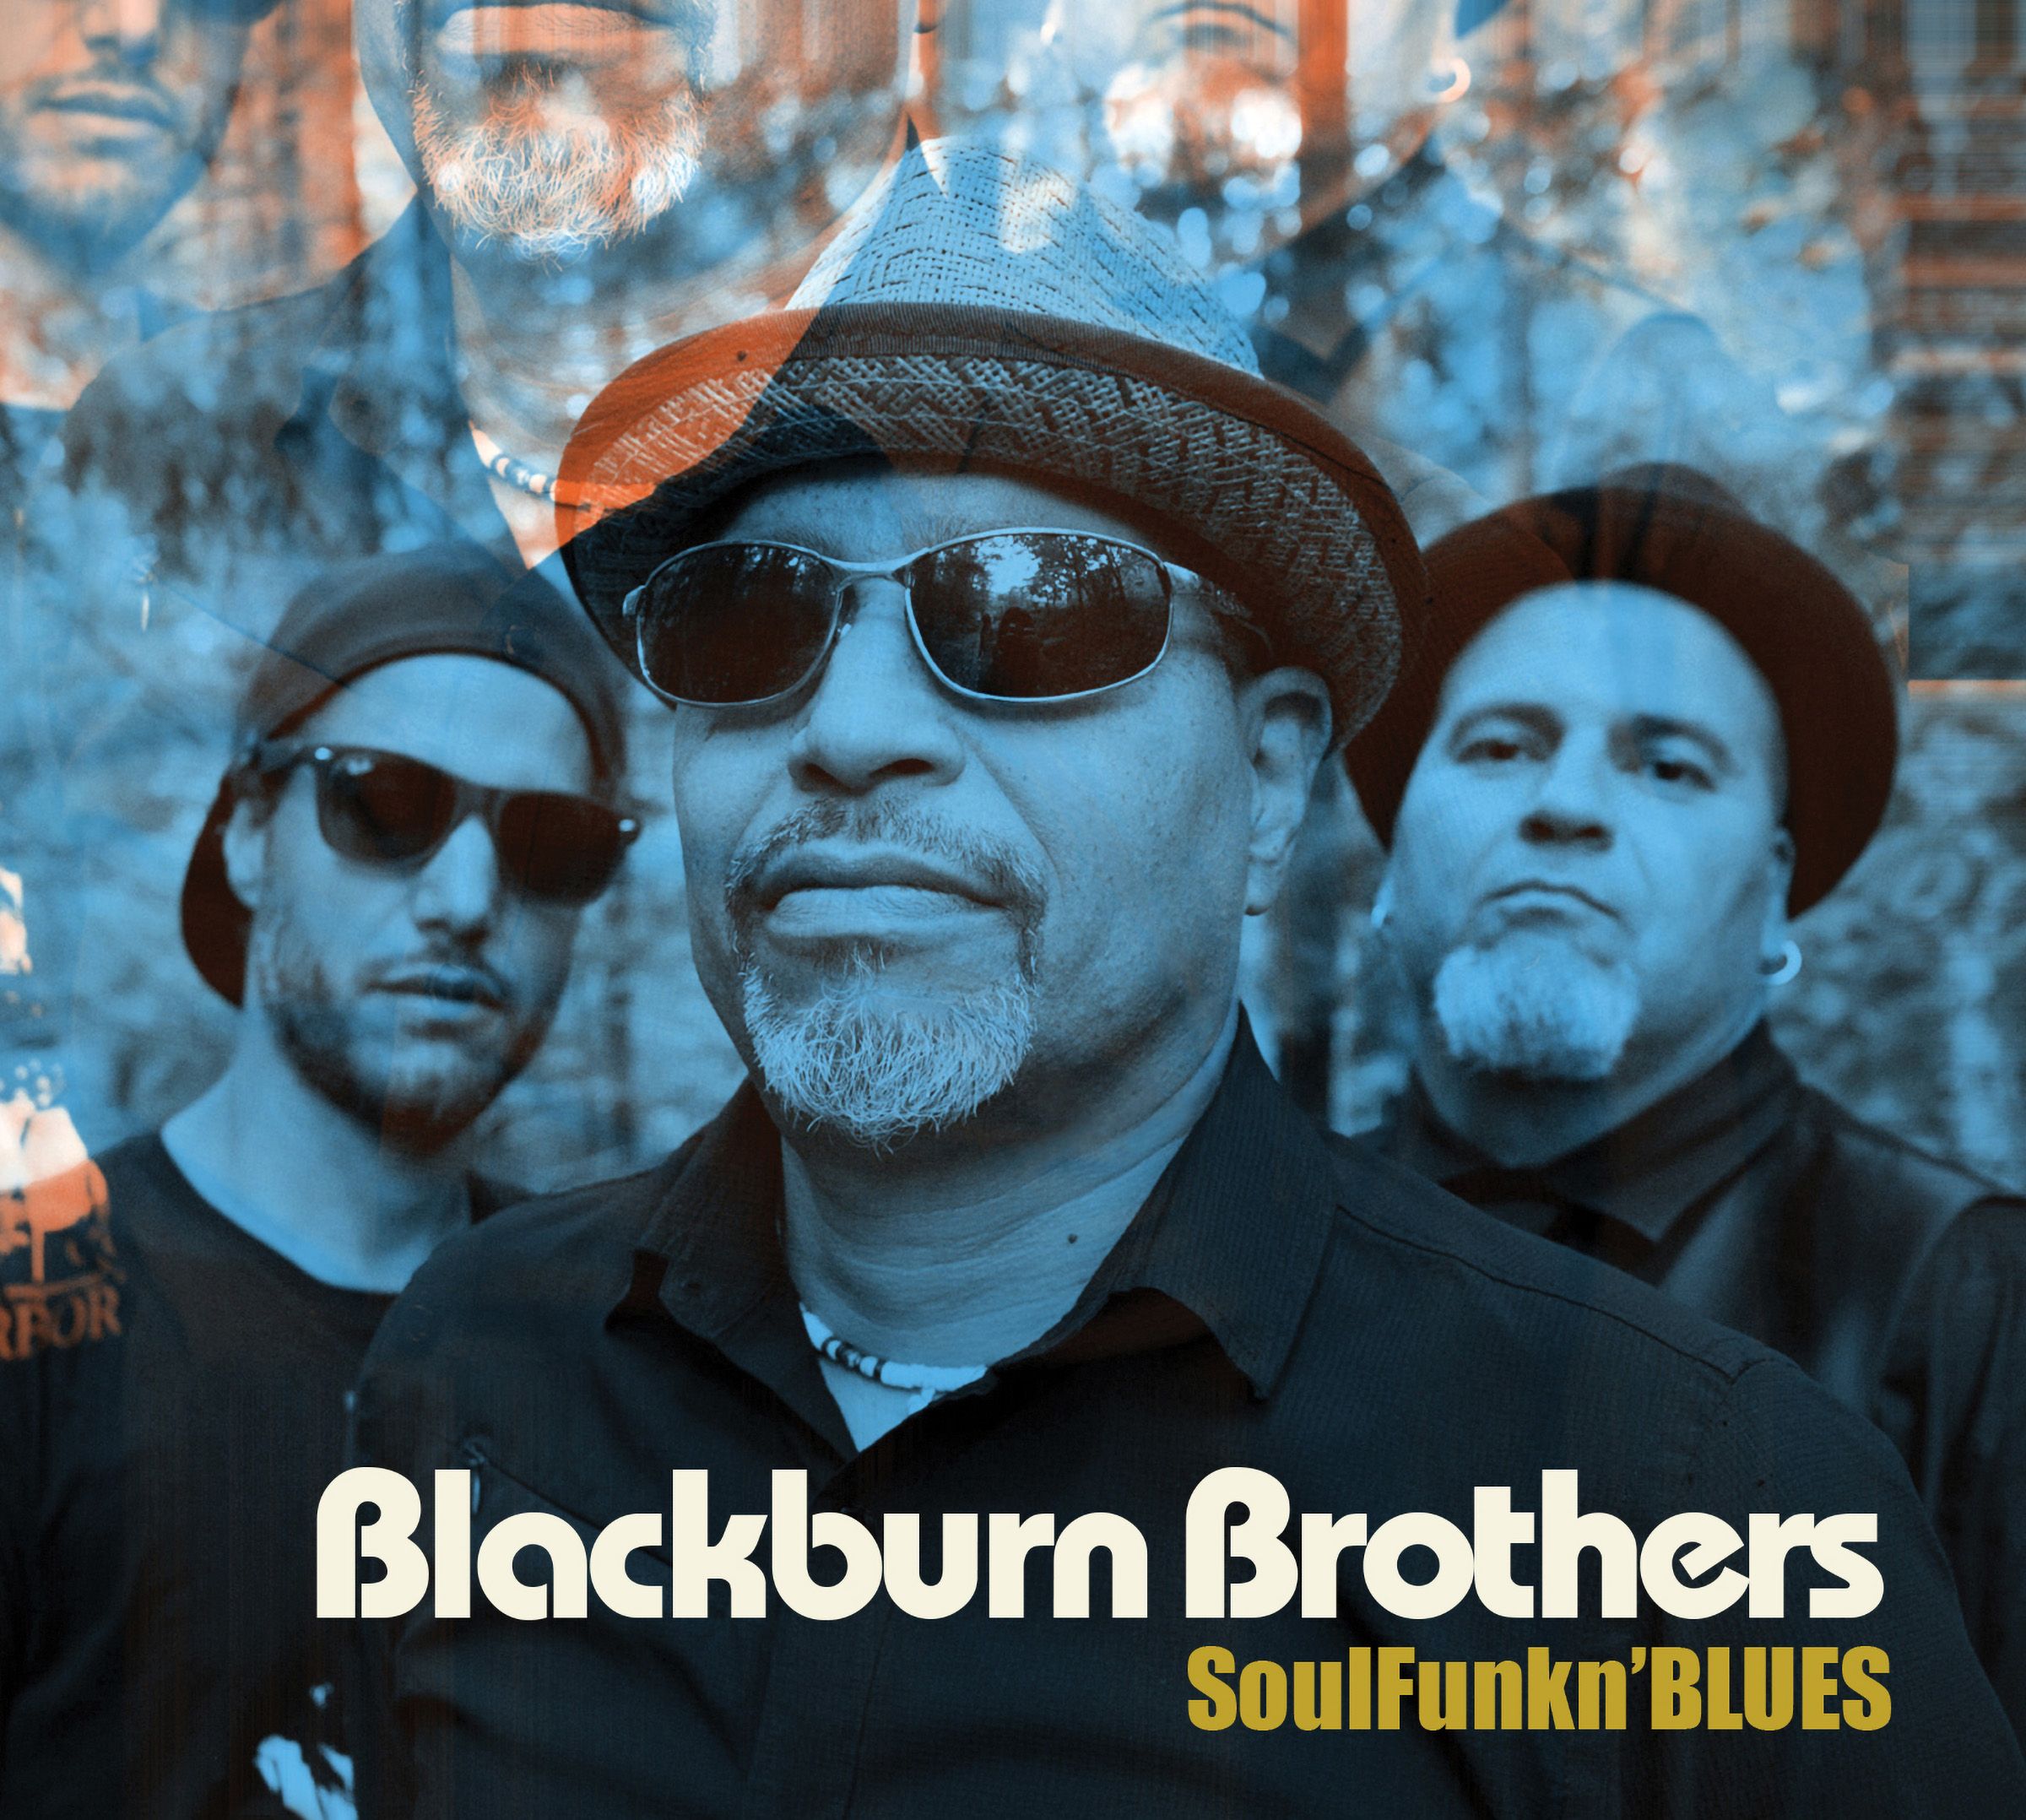 ELECTRO-FI RECORDS PRESENTS: "SOULFUNKN'BLUES" BY THE BLACKBURN BROTHERS